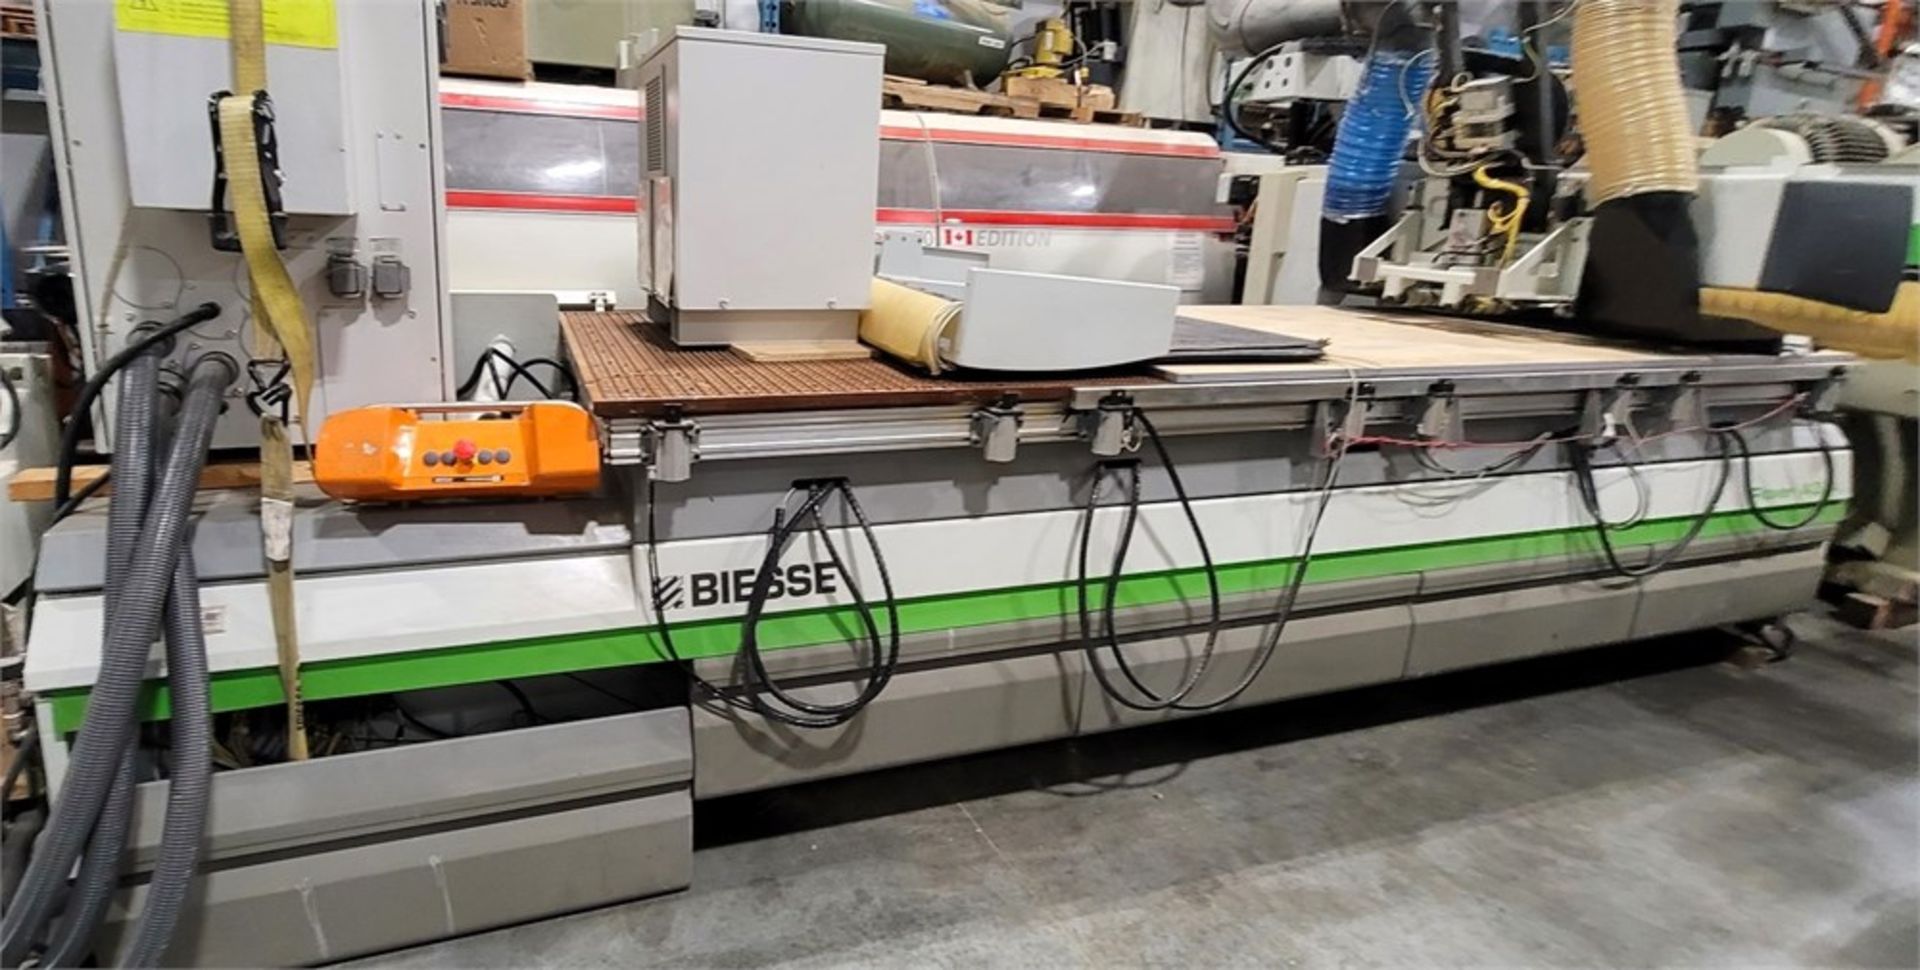 2008 BIESSE ROVER A3.4L CNC ROUTER, 4' X 12' NESTED TABLE, 230V, S/N 33781 - Image 10 of 15